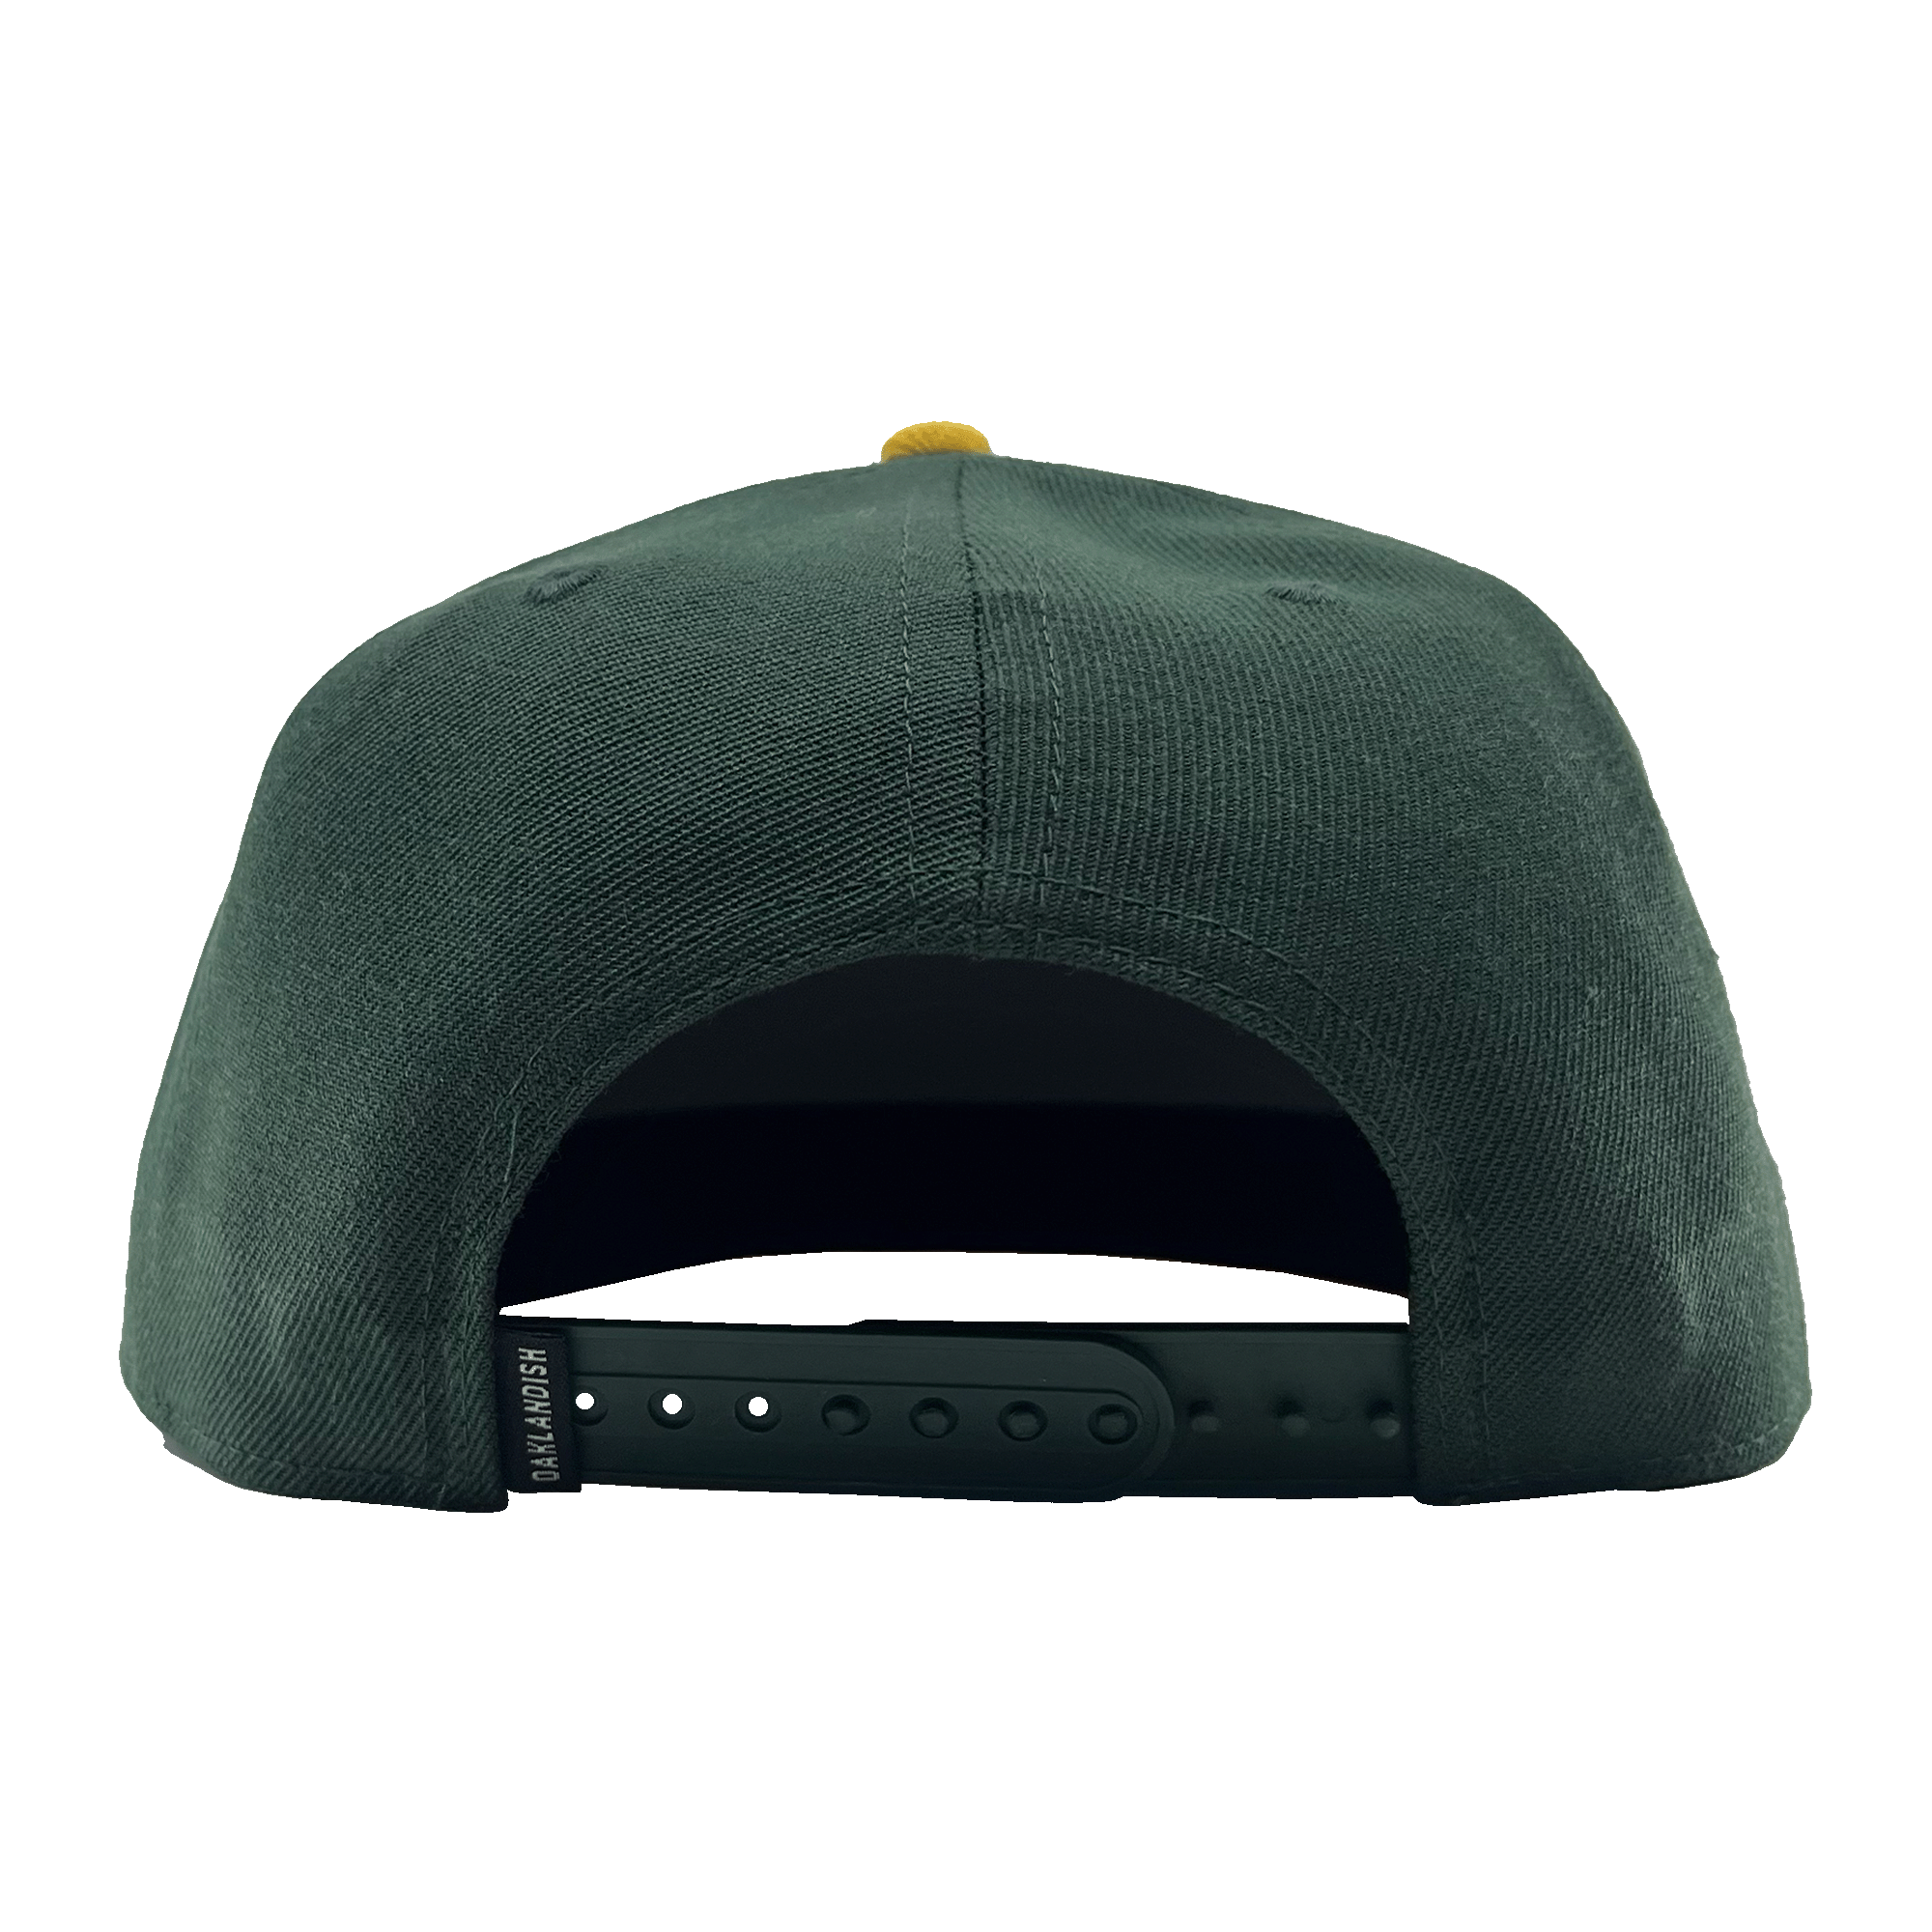 Back view of green snapback cap with Oaklandish wordmark tag.